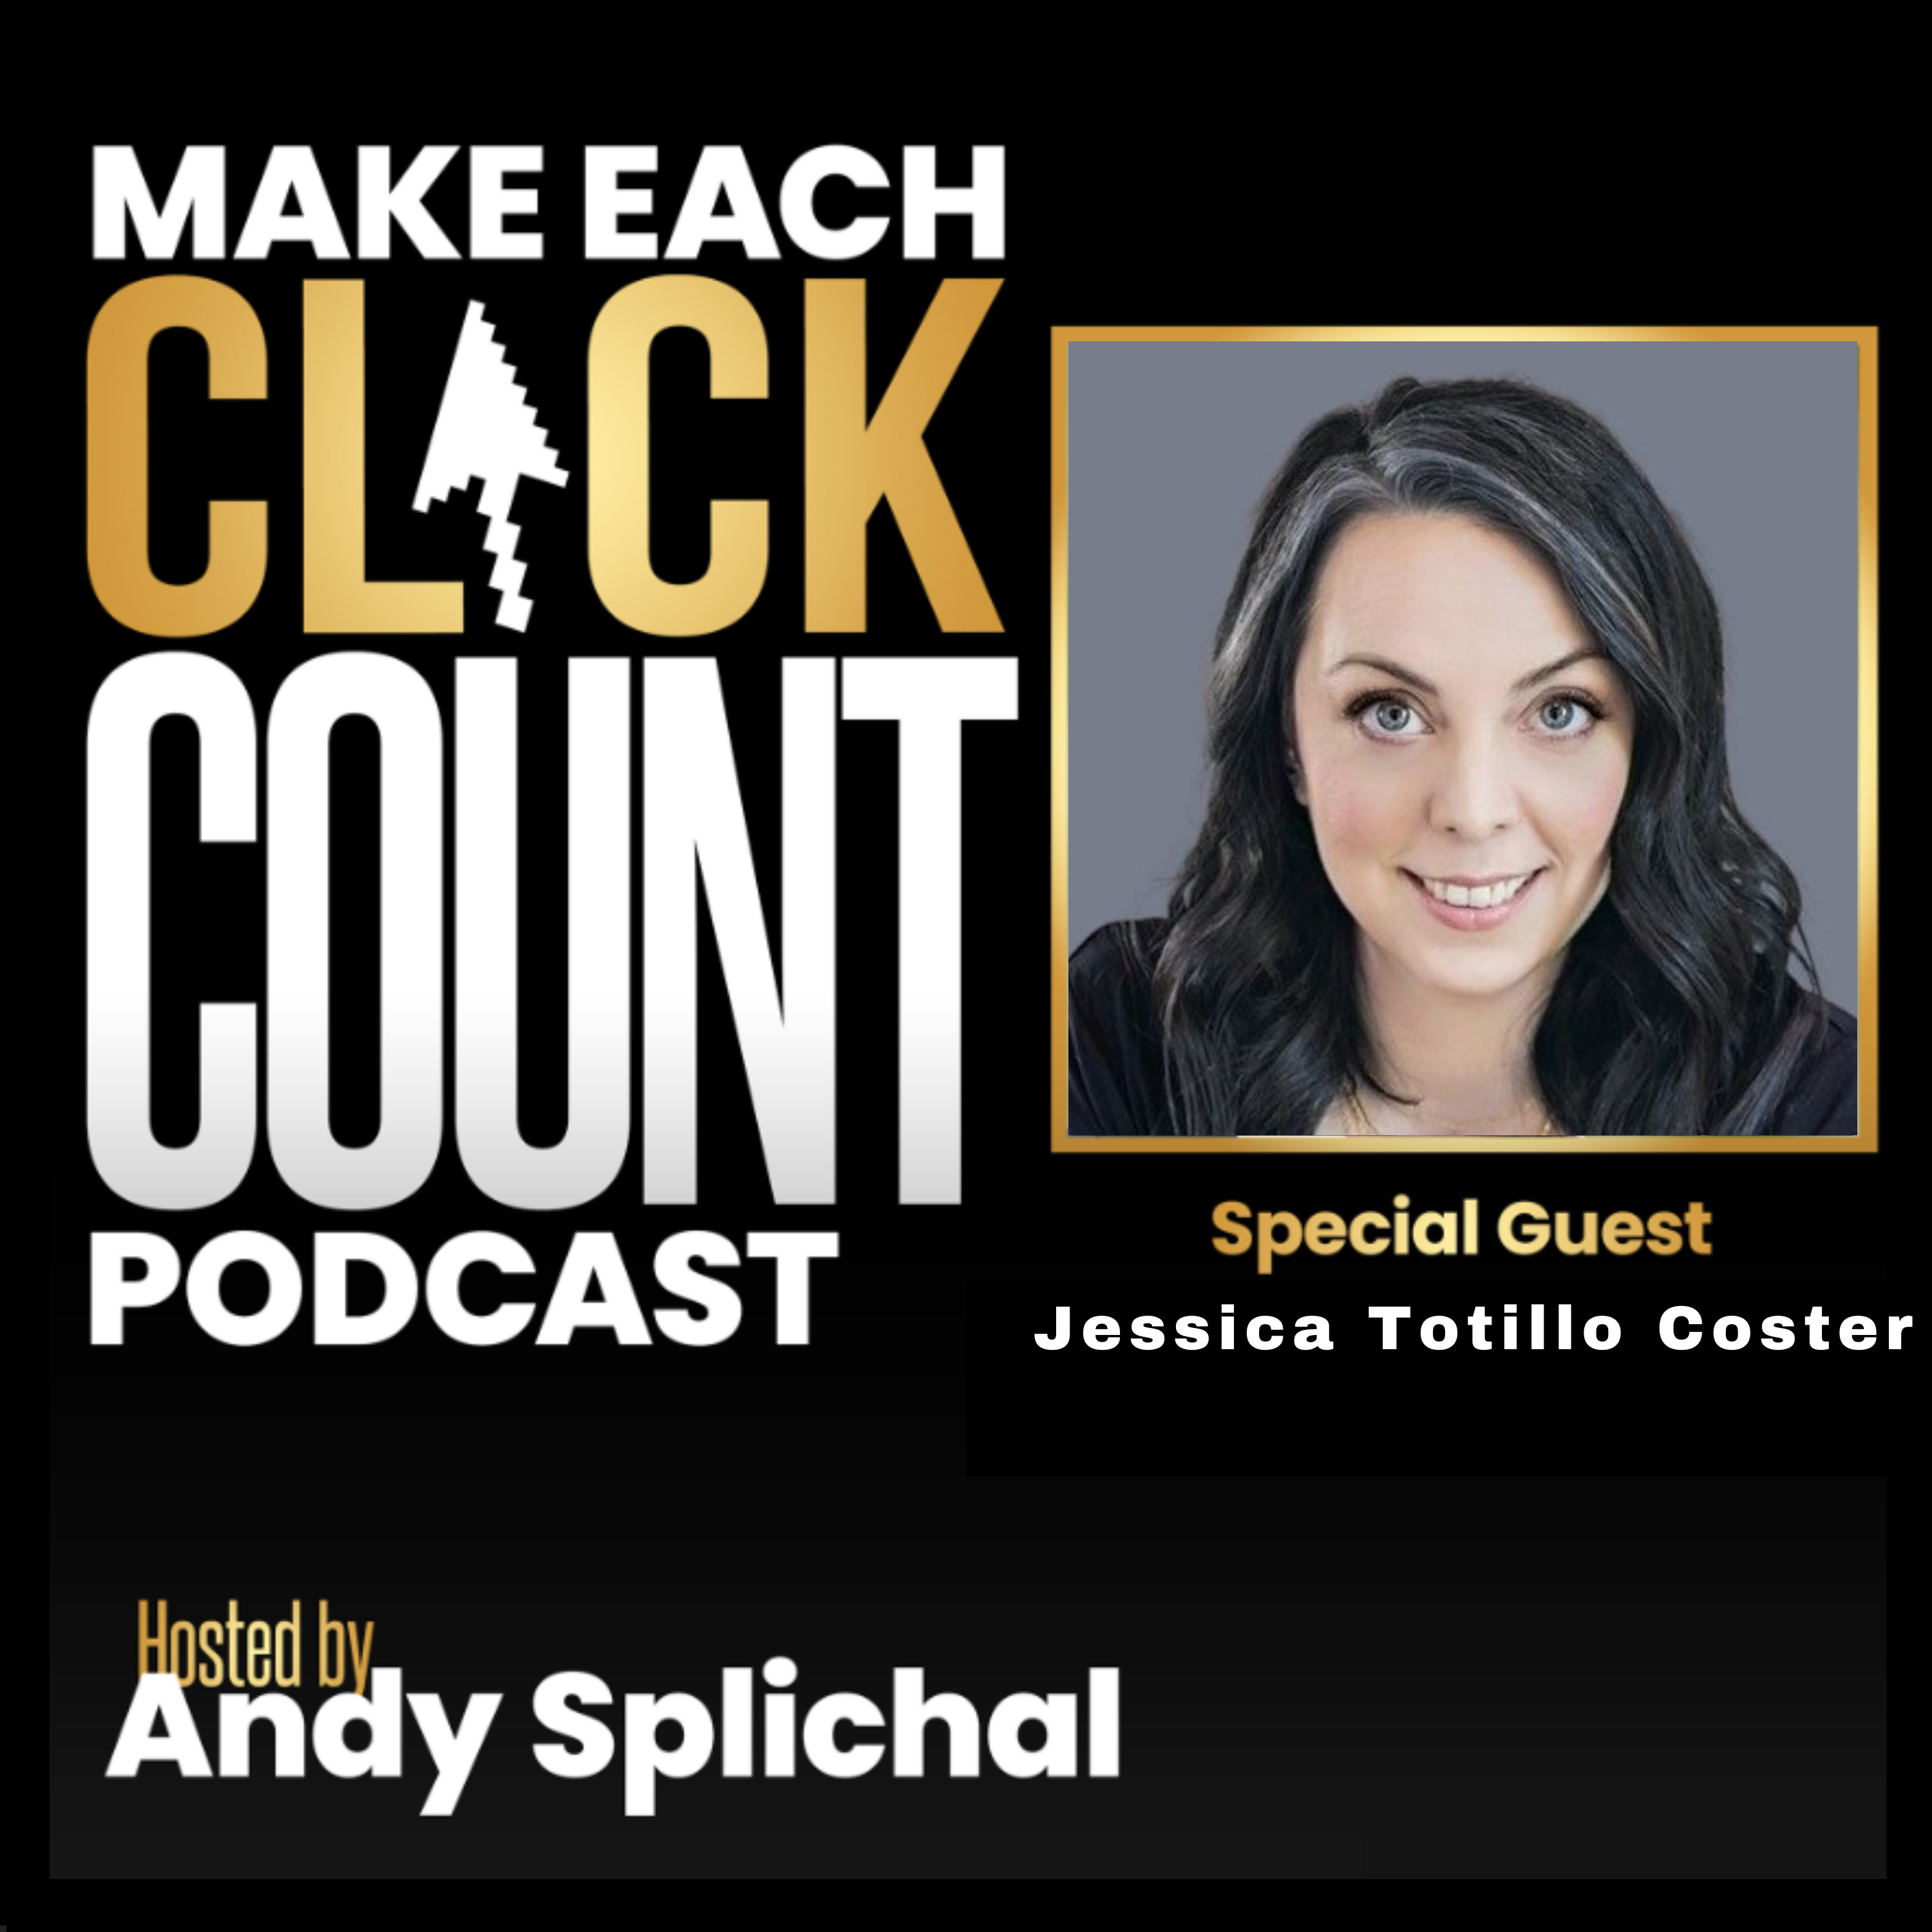 Artwork for podcast Make Each Click Count Hosted By Andy Splichal